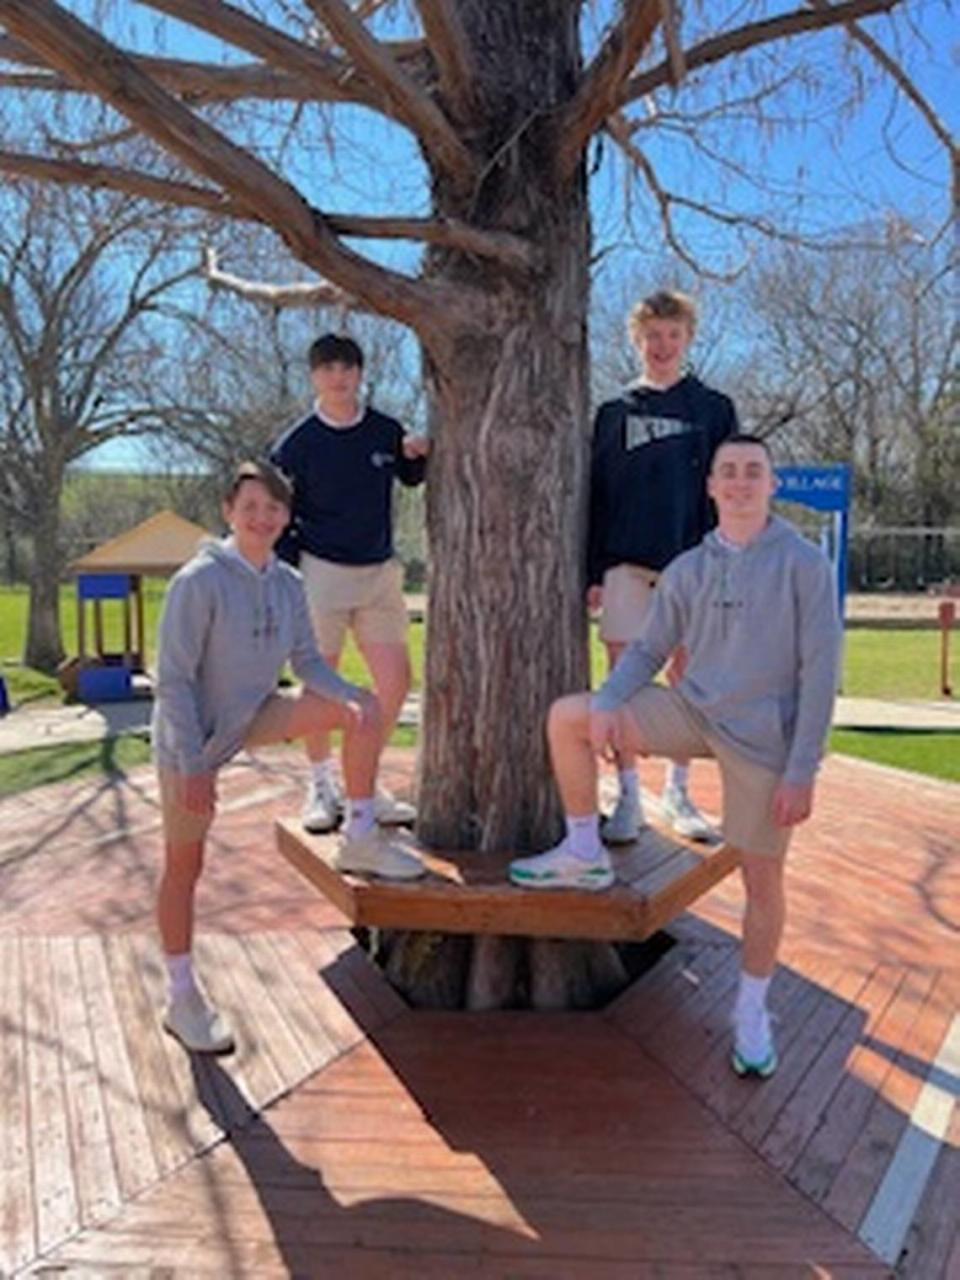 From left, Connor Karazissis, Brady McGraw, Austin Jones, and Evan Krum standing next to one of the many oak trees at The Oakridge School.